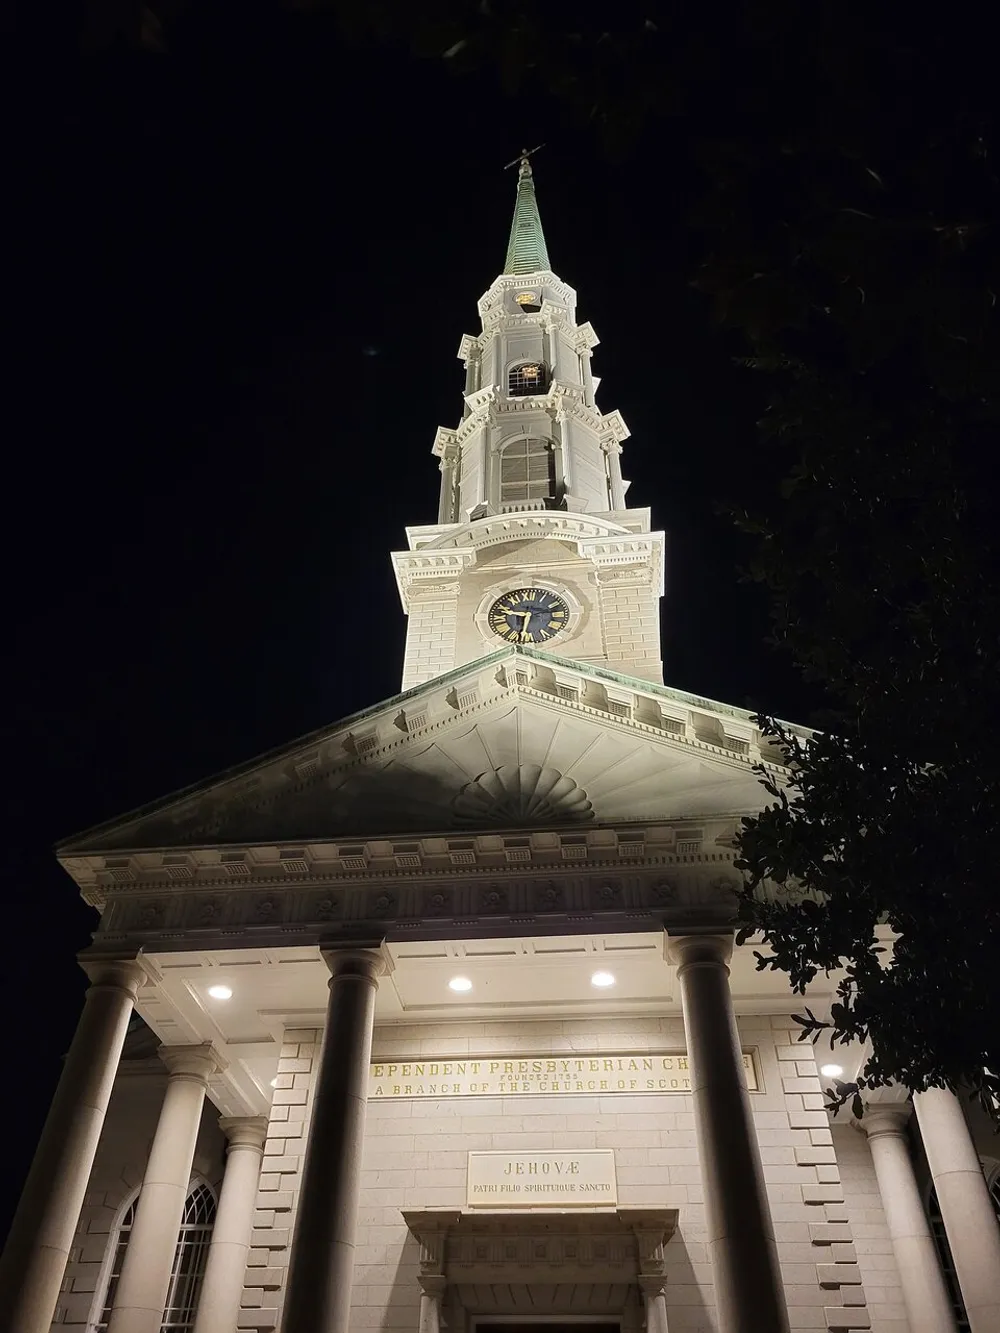 The image shows the illuminated facade of a church at night with a prominent steeple and classical architecture including columns and a pediment with inscriptions